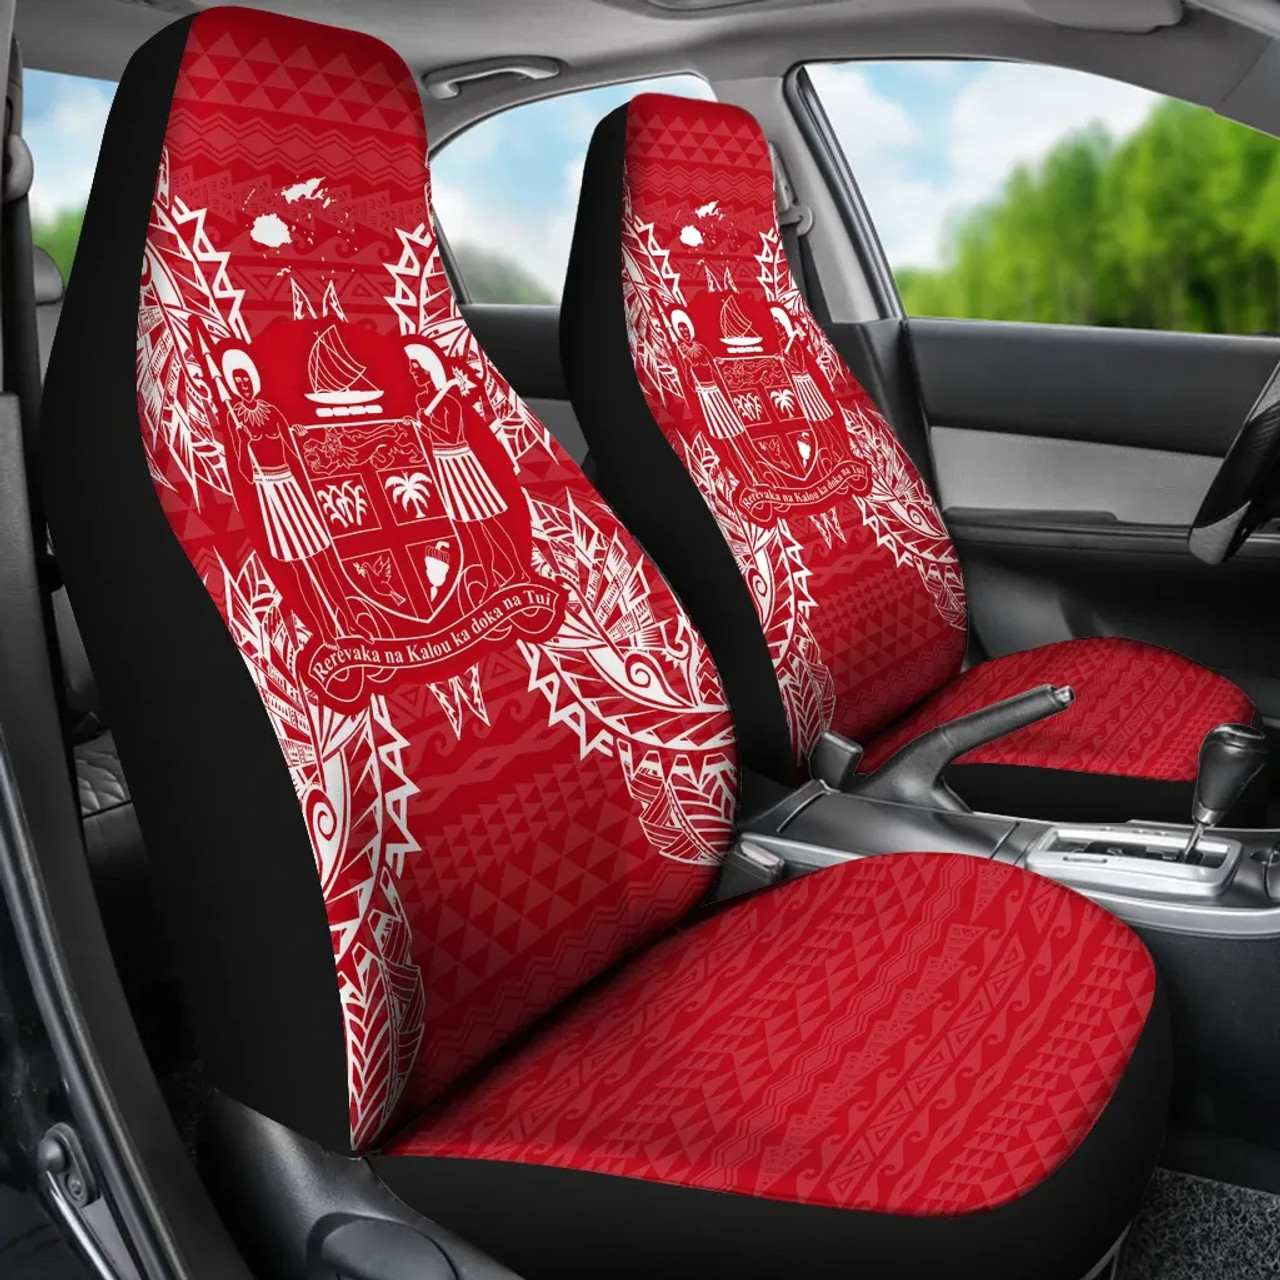 Fiji Car Seat Cover - Fiji Coat Of Arms Map Red White